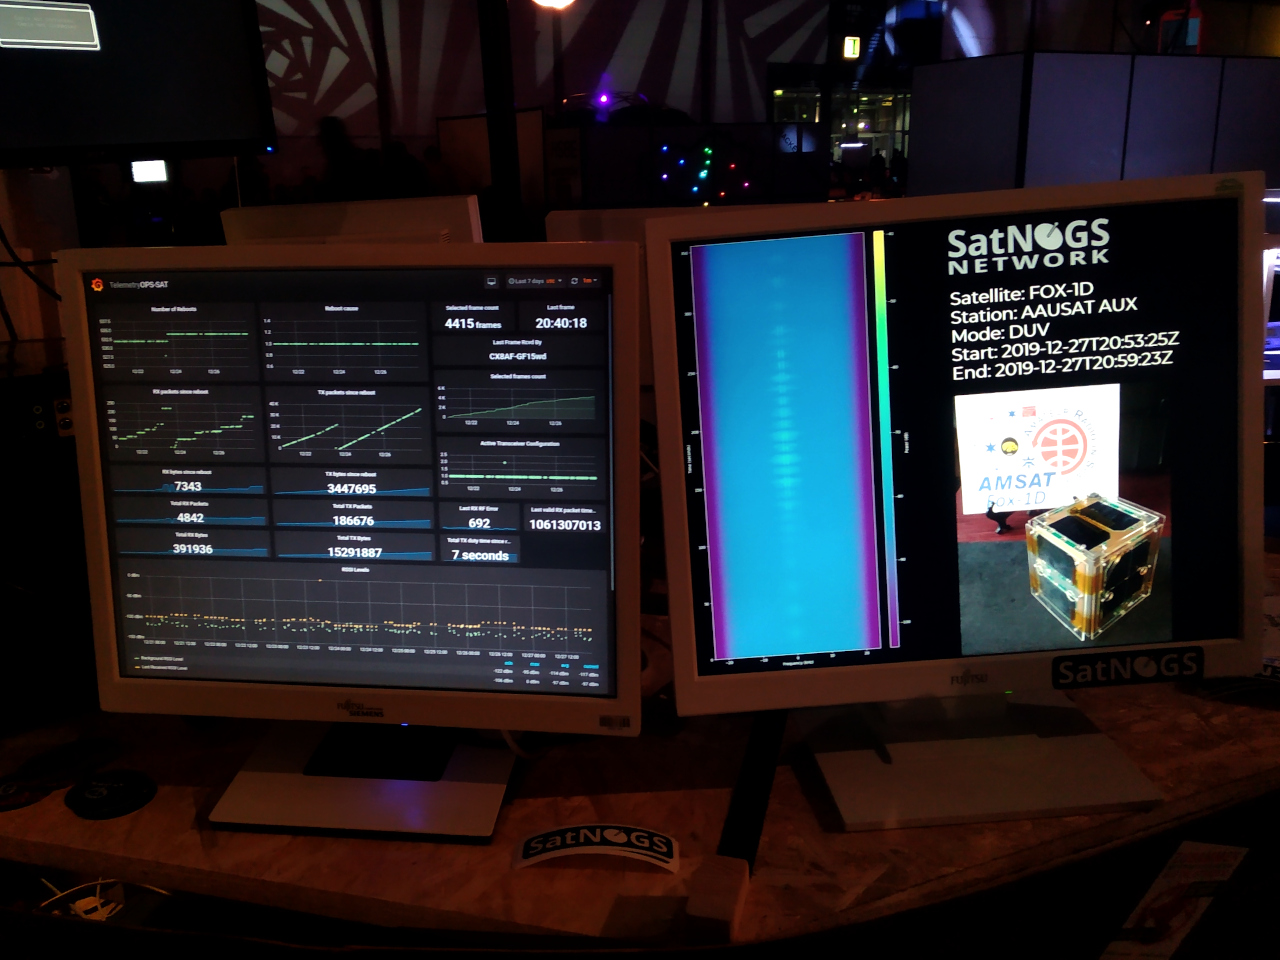 Satellite dashboards and satnogs demo display